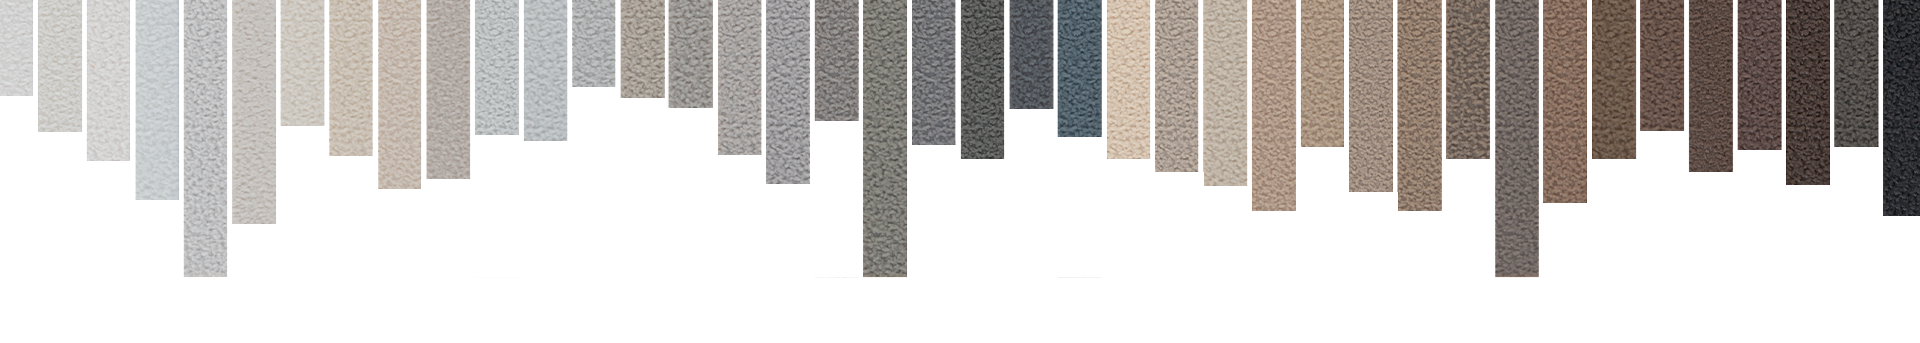 Grout samples banner